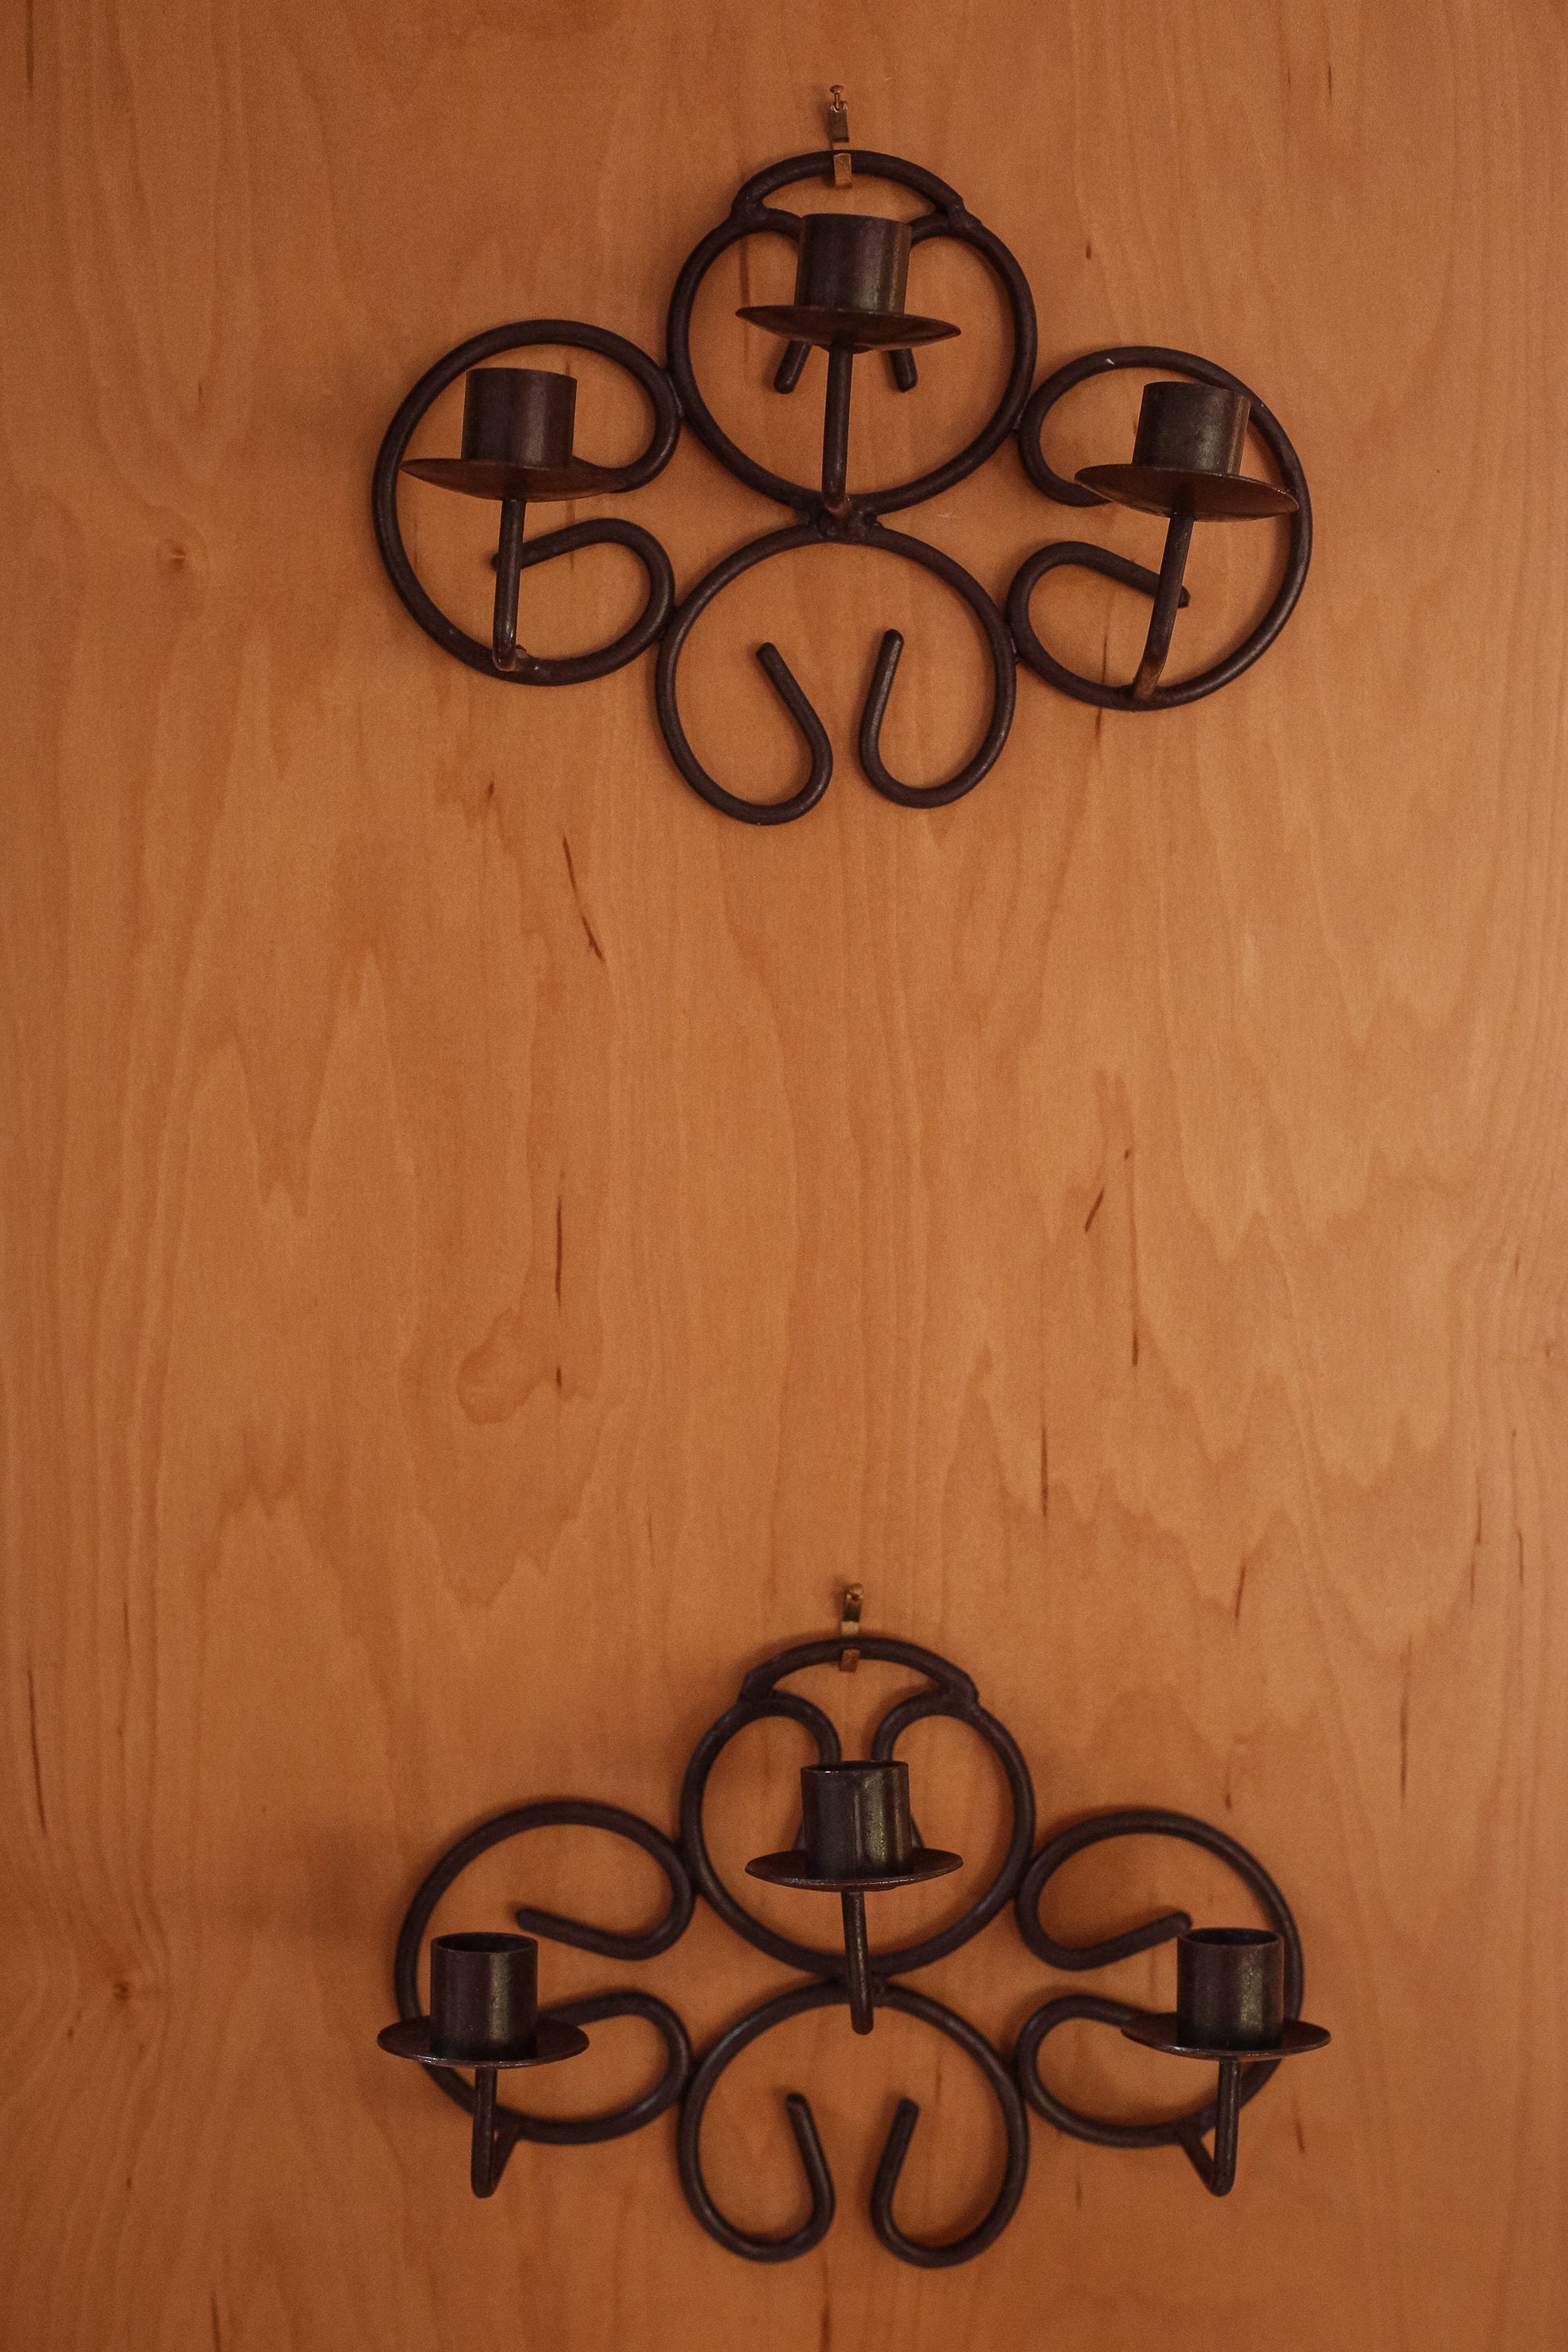 Vintage Iron Wall Candle Holders - Set of Two Black Metal Wall Candleabras